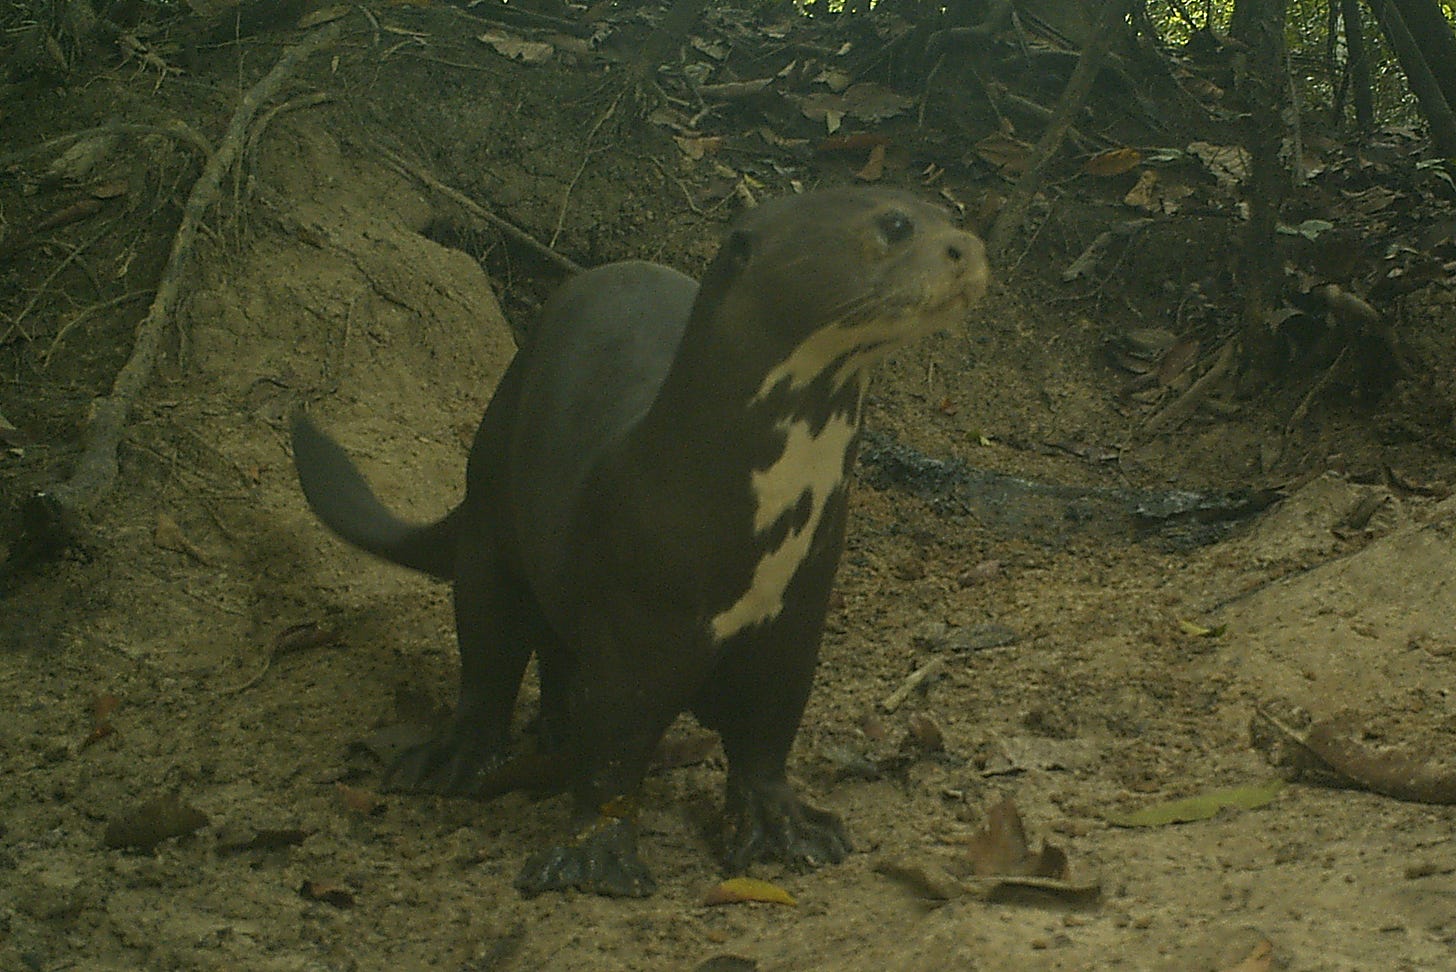 A picture of a giant otter, with webbed feet and white spots on its neck